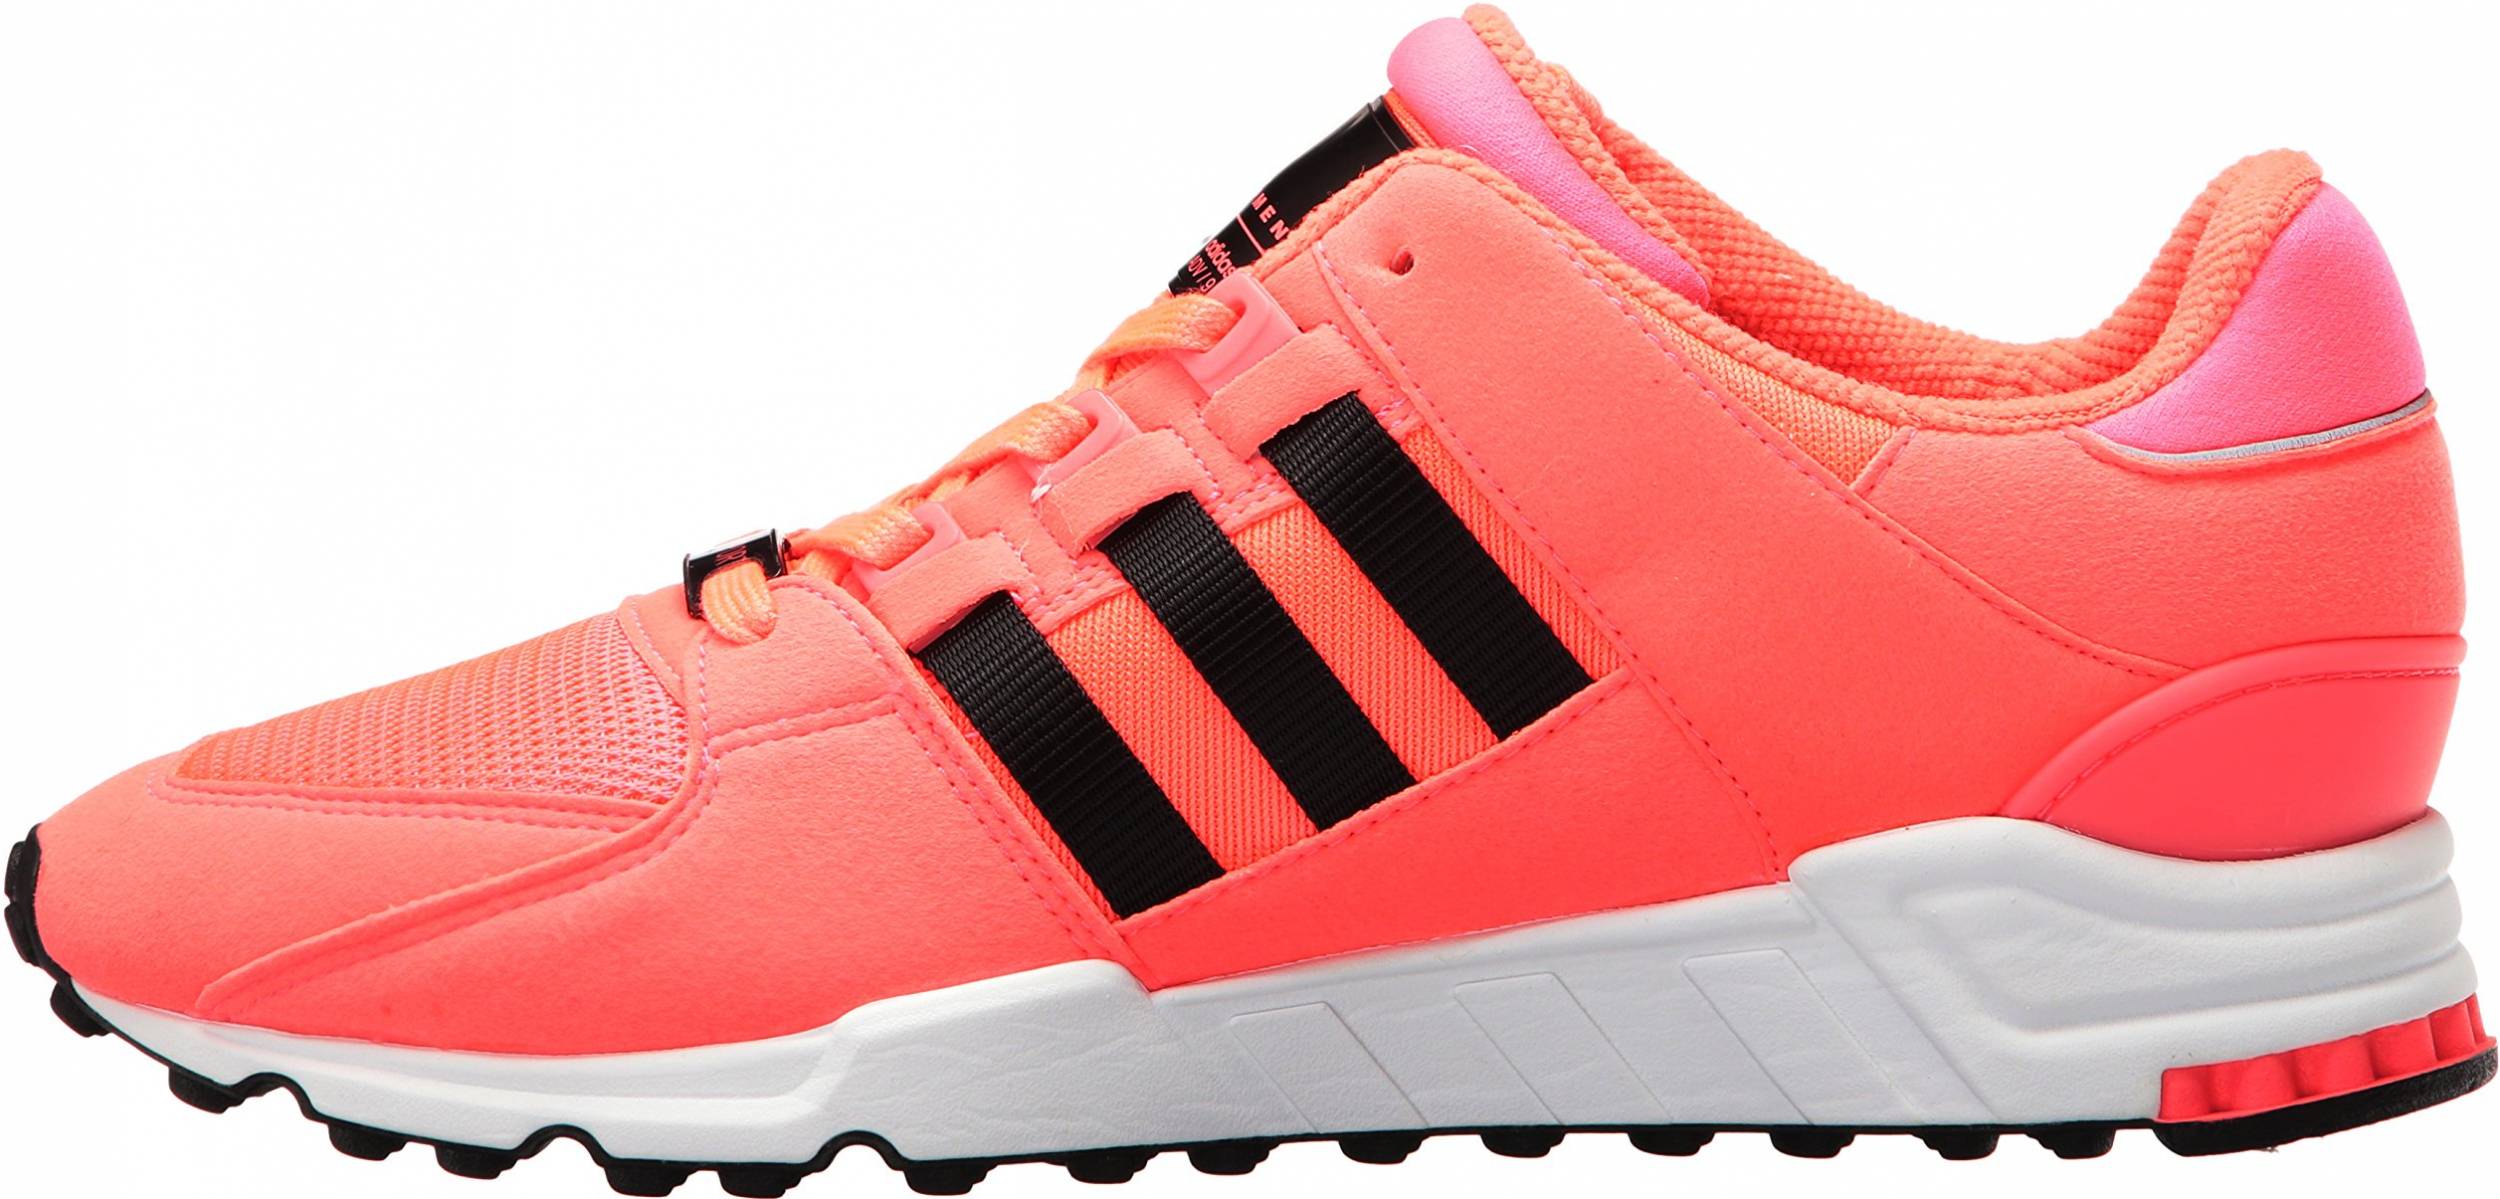 Adidas EQT Support RF sneakers in 6 colors (only $60) | RunRepeat